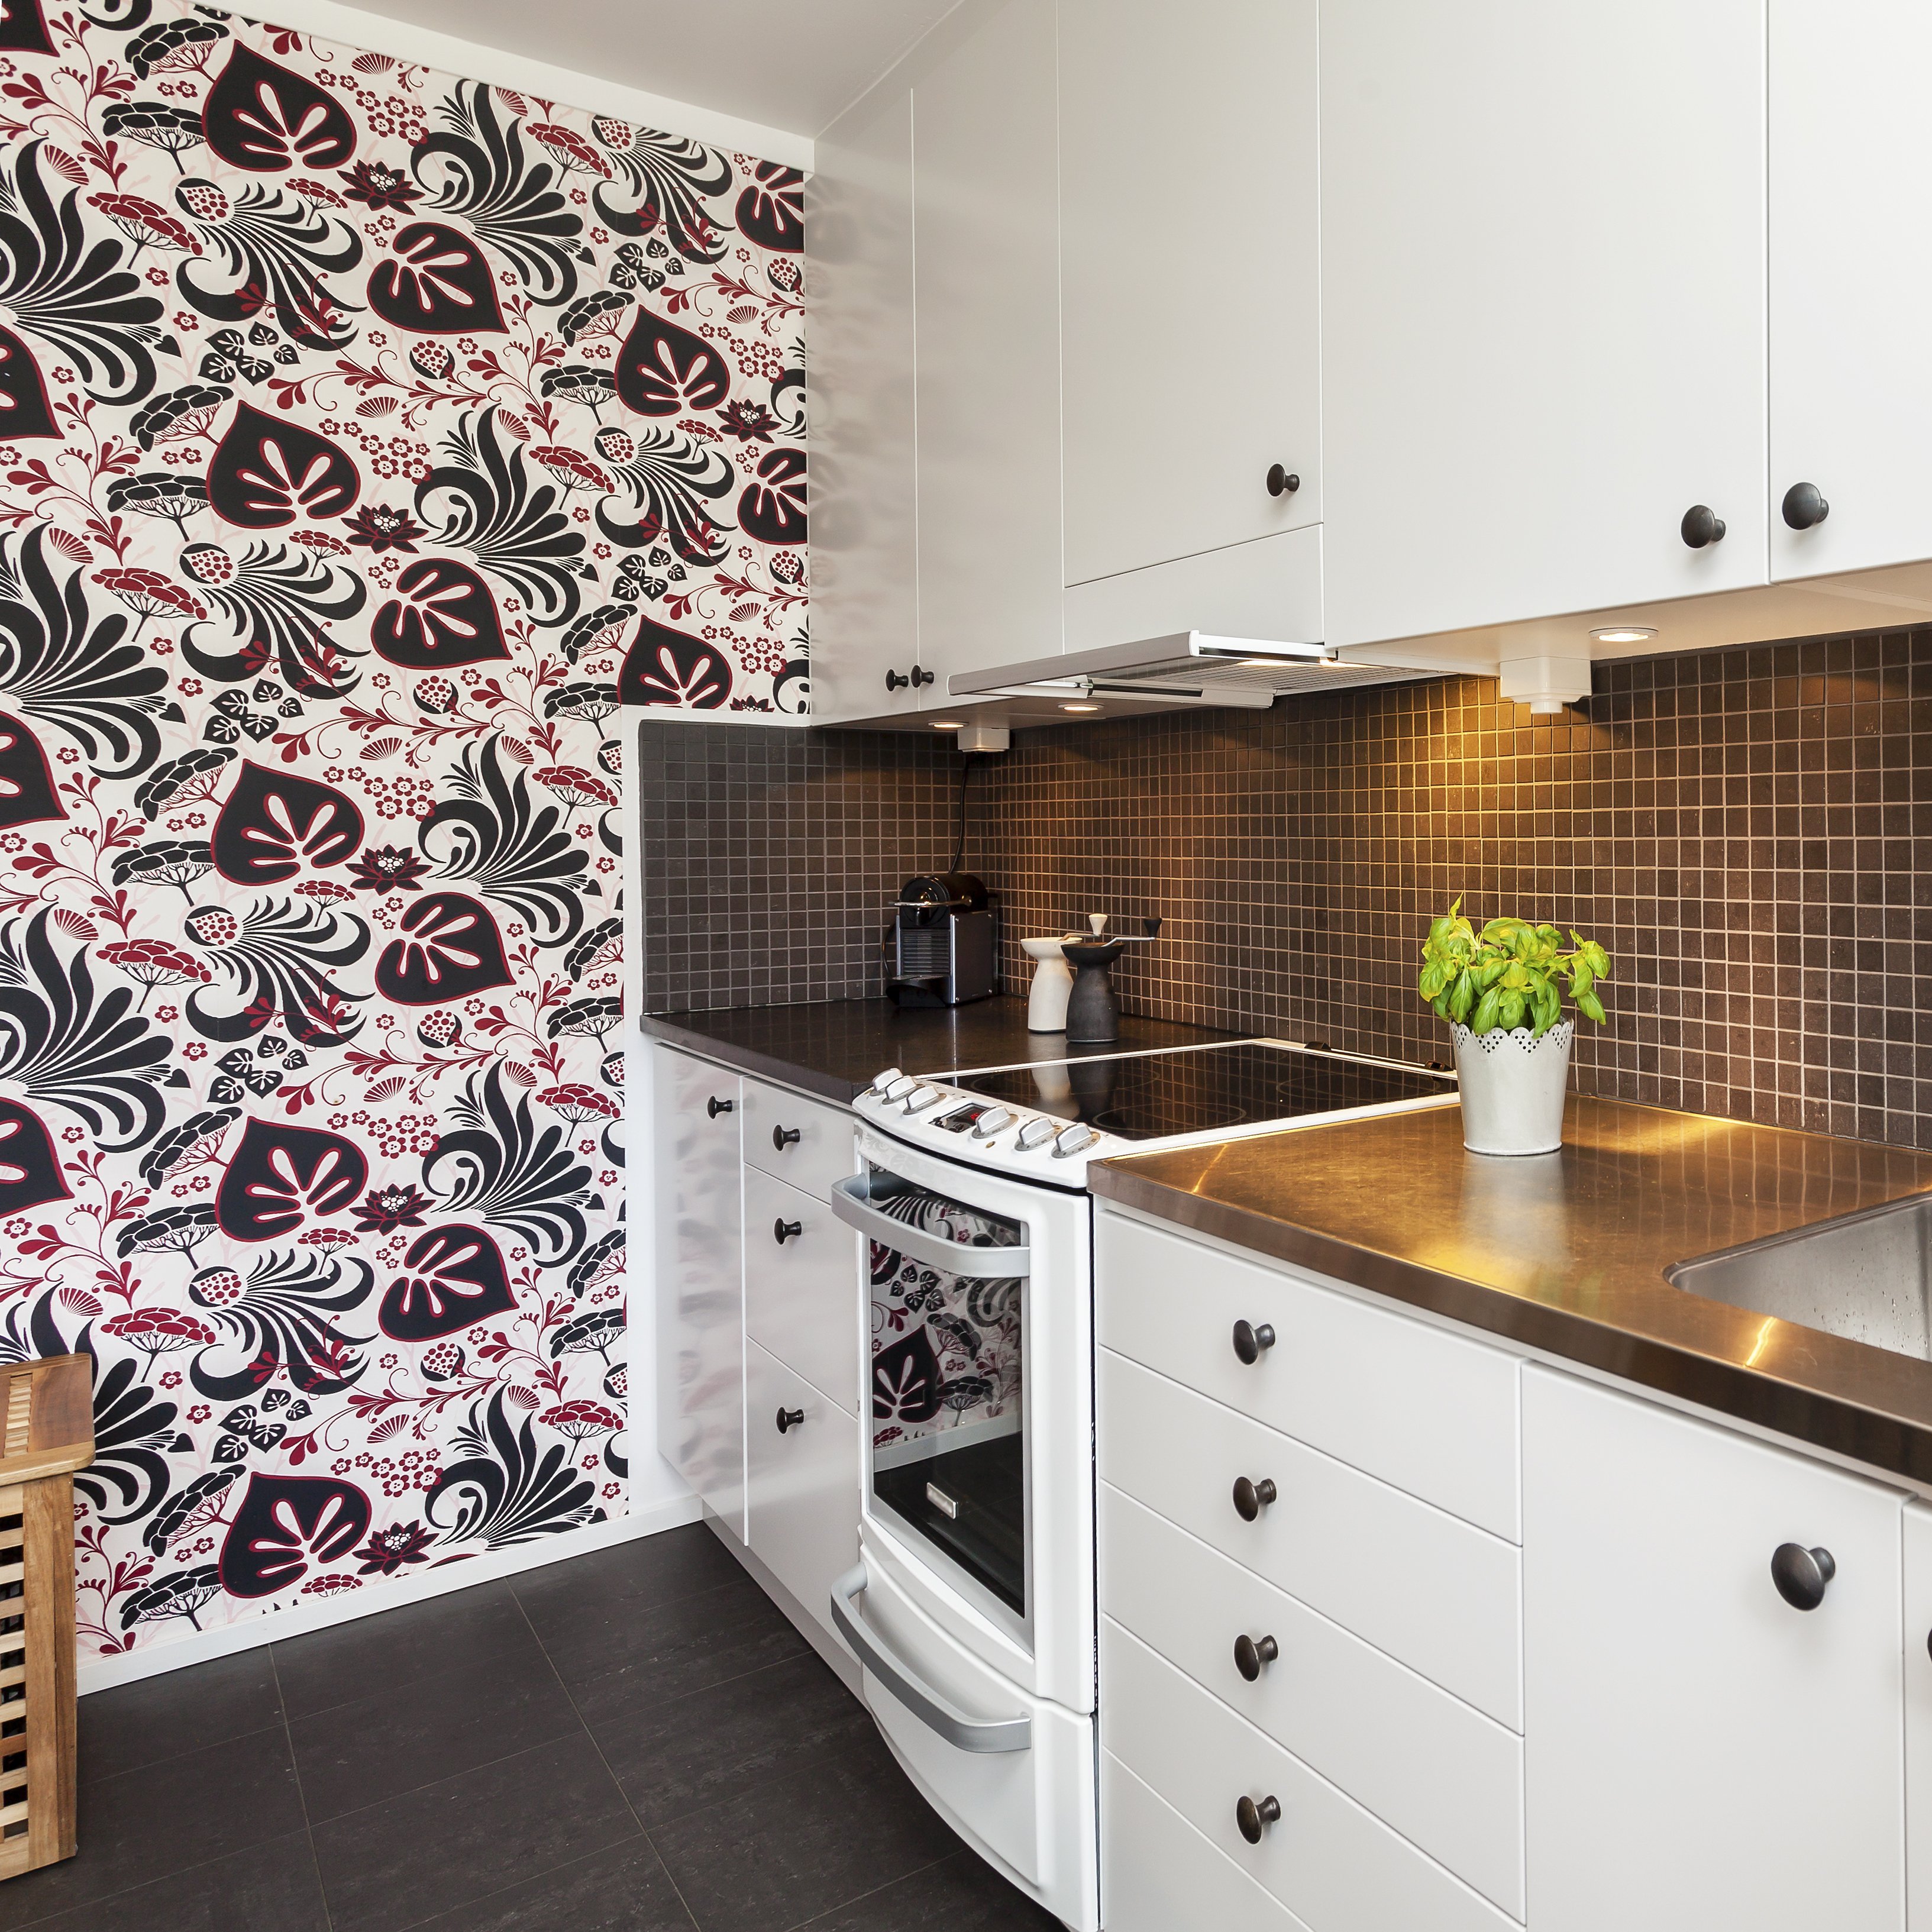 A photo of a kitchen interior with modern wallpaper. | Photo: Shutterstock